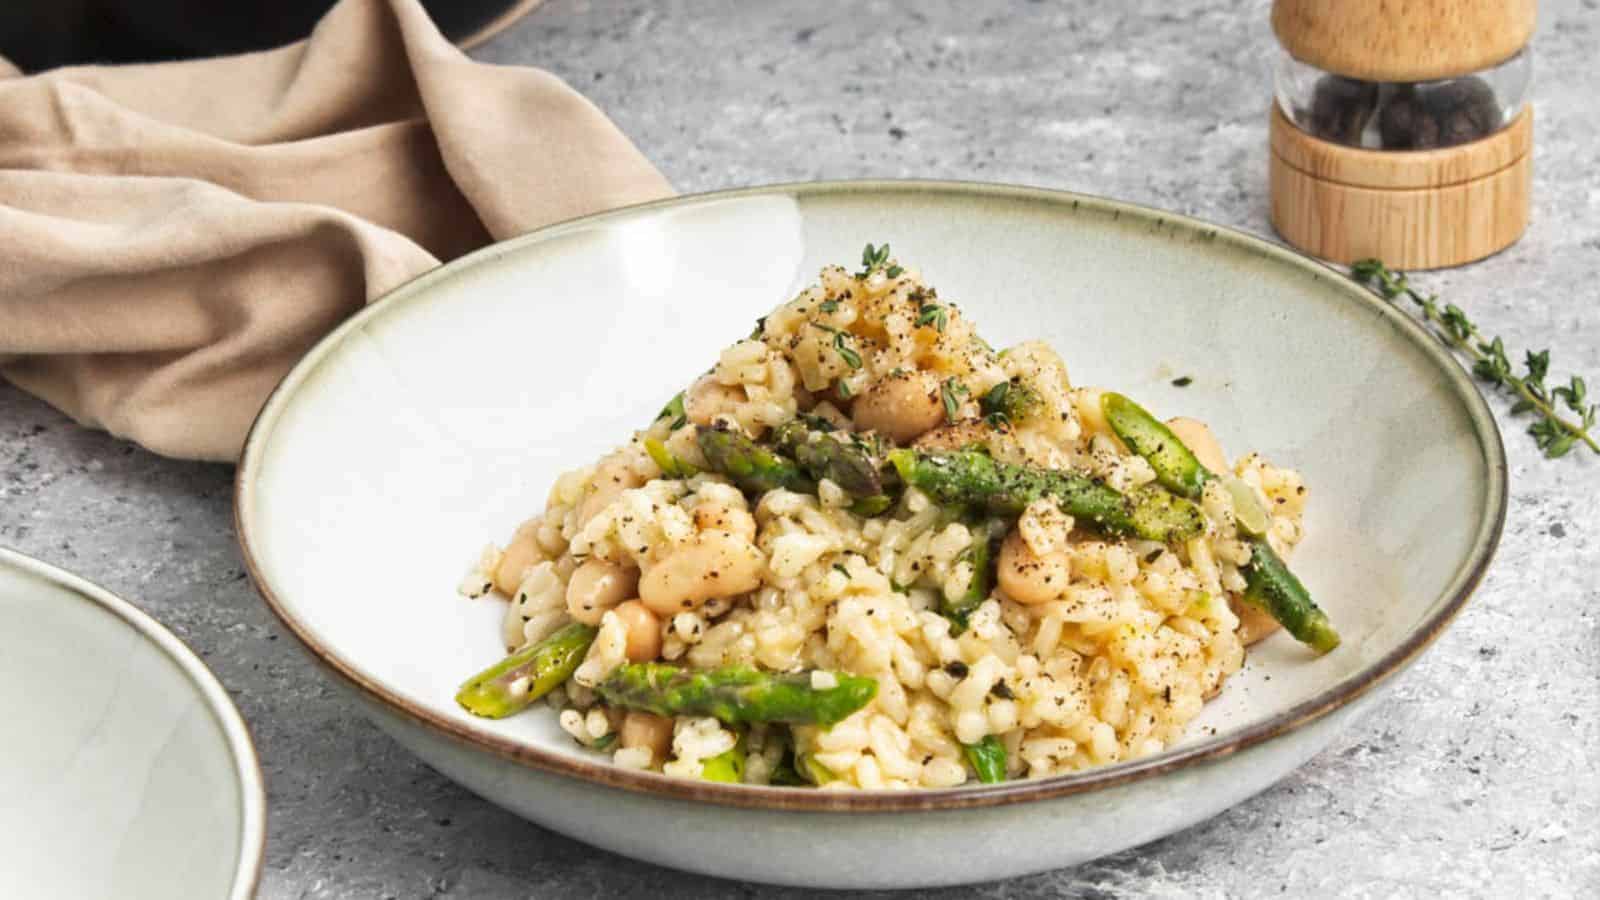 <p>A warm bowl of our Asparagus and White Bean Risotto can be the star of your dinner table. Everyone will love how the gentle flavors blend so nicely, making it a great choice for a comforting meal. It's equally perfect for a quiet night in or a gathering with friends. Include this Italian dish in your meal planning for a surefire hit.<br><strong>Get the Recipe: </strong><a href="https://twocityvegans.com/quick-asparagus-and-white-bean-risotto-recipe/#recipe?utm_source=msn&utm_medium=page&utm_campaign=">Asparagus and White Bean Risotto</a></p>